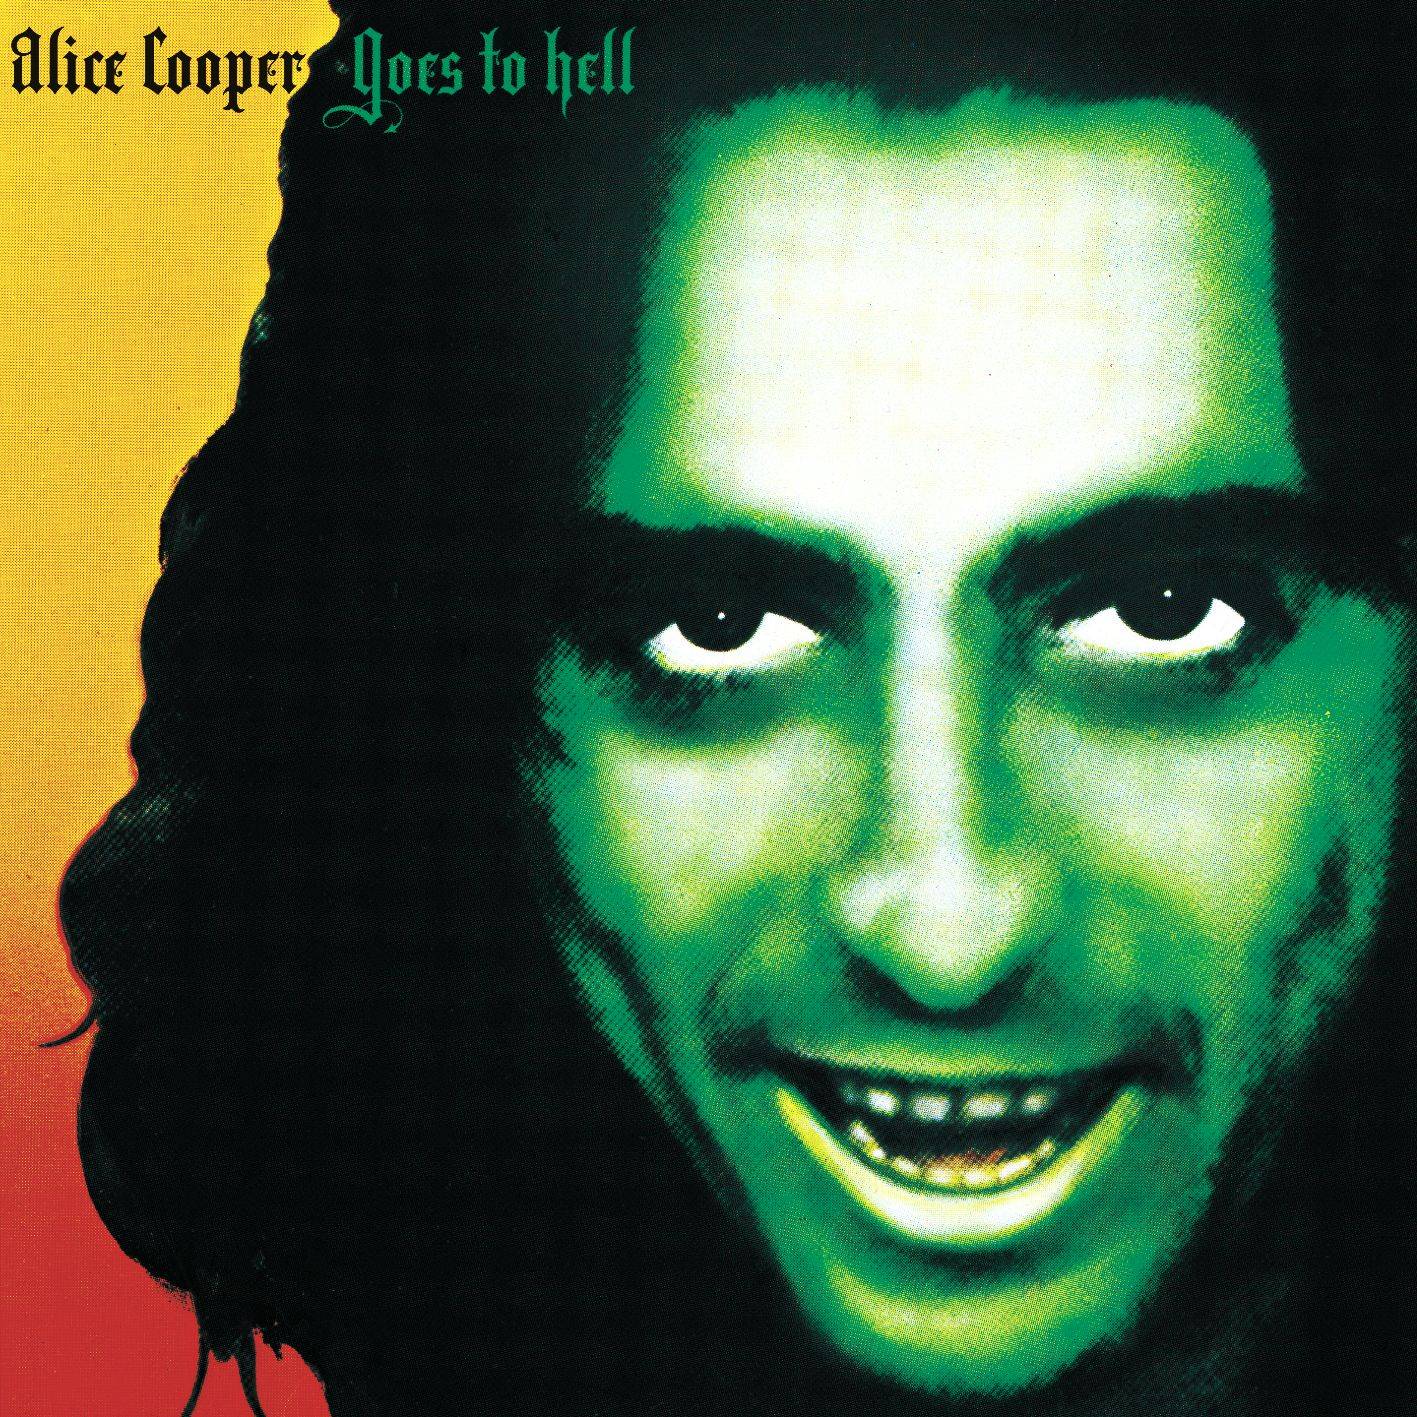 ALICE COOPER - Alice Cooper Goes To Hell cover 